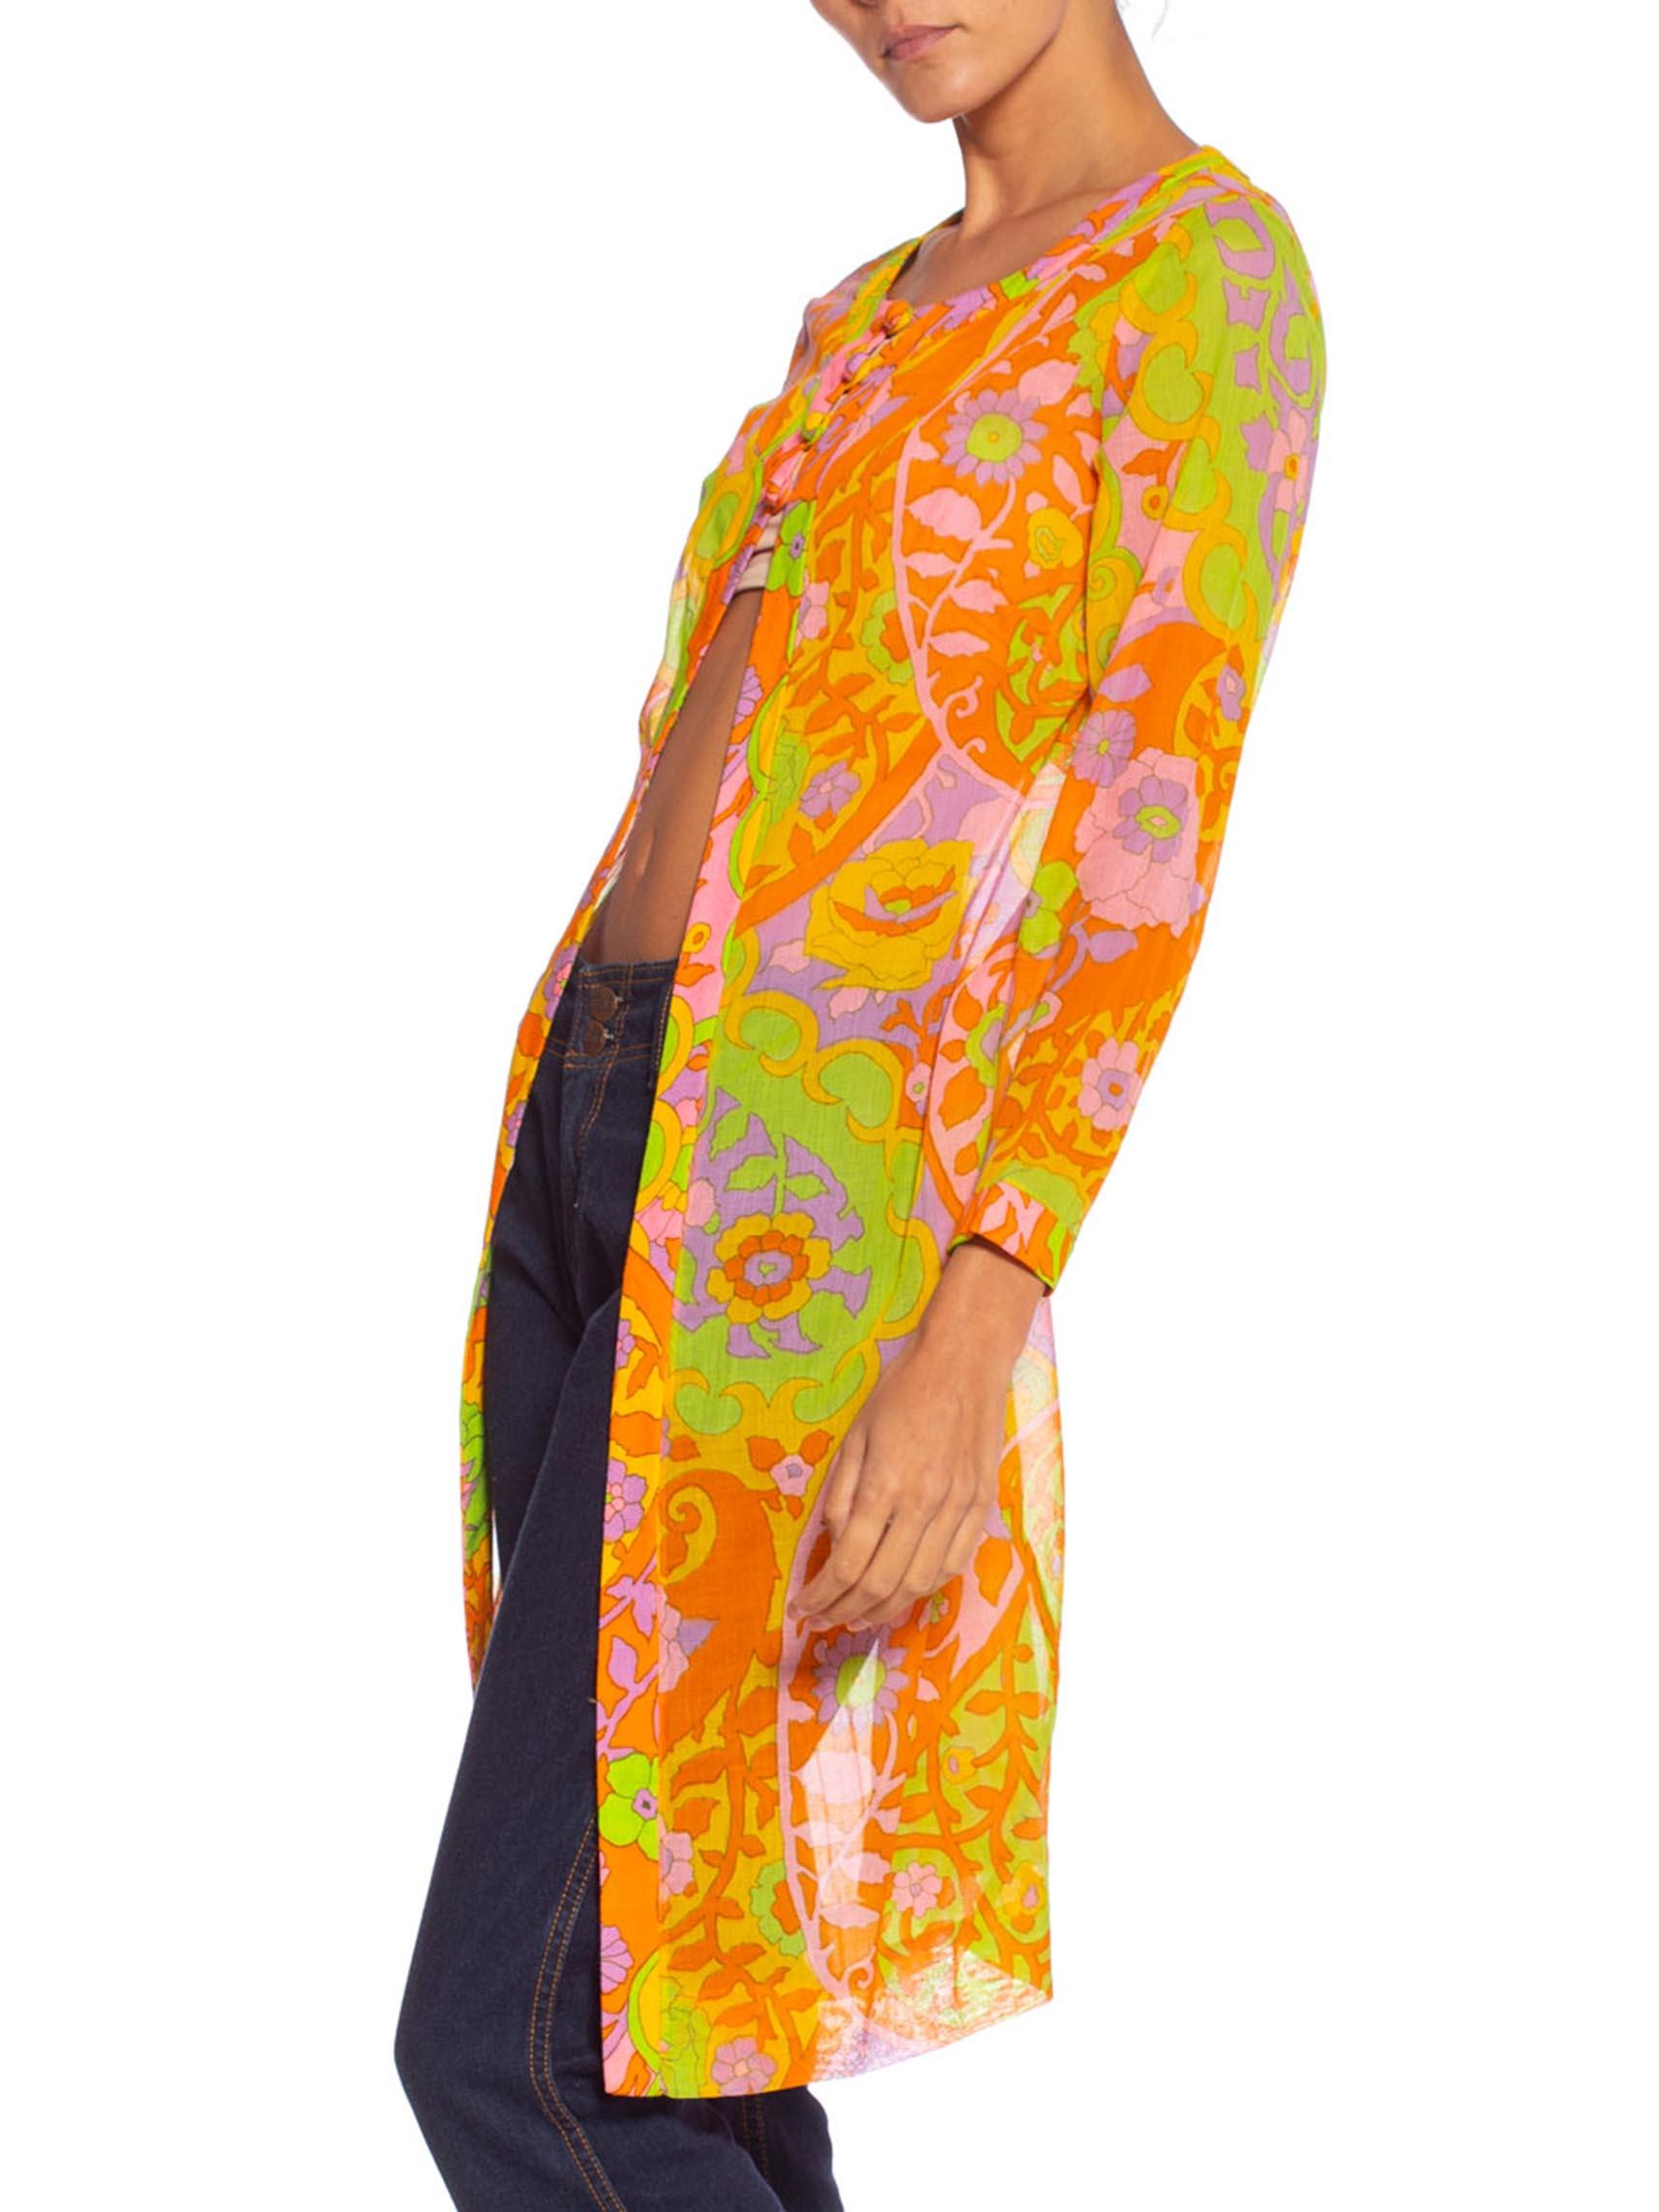 1960S Lime Green & Orange Cotton Voile Mod Psychedelic Floral Tunic Jacket Top 2